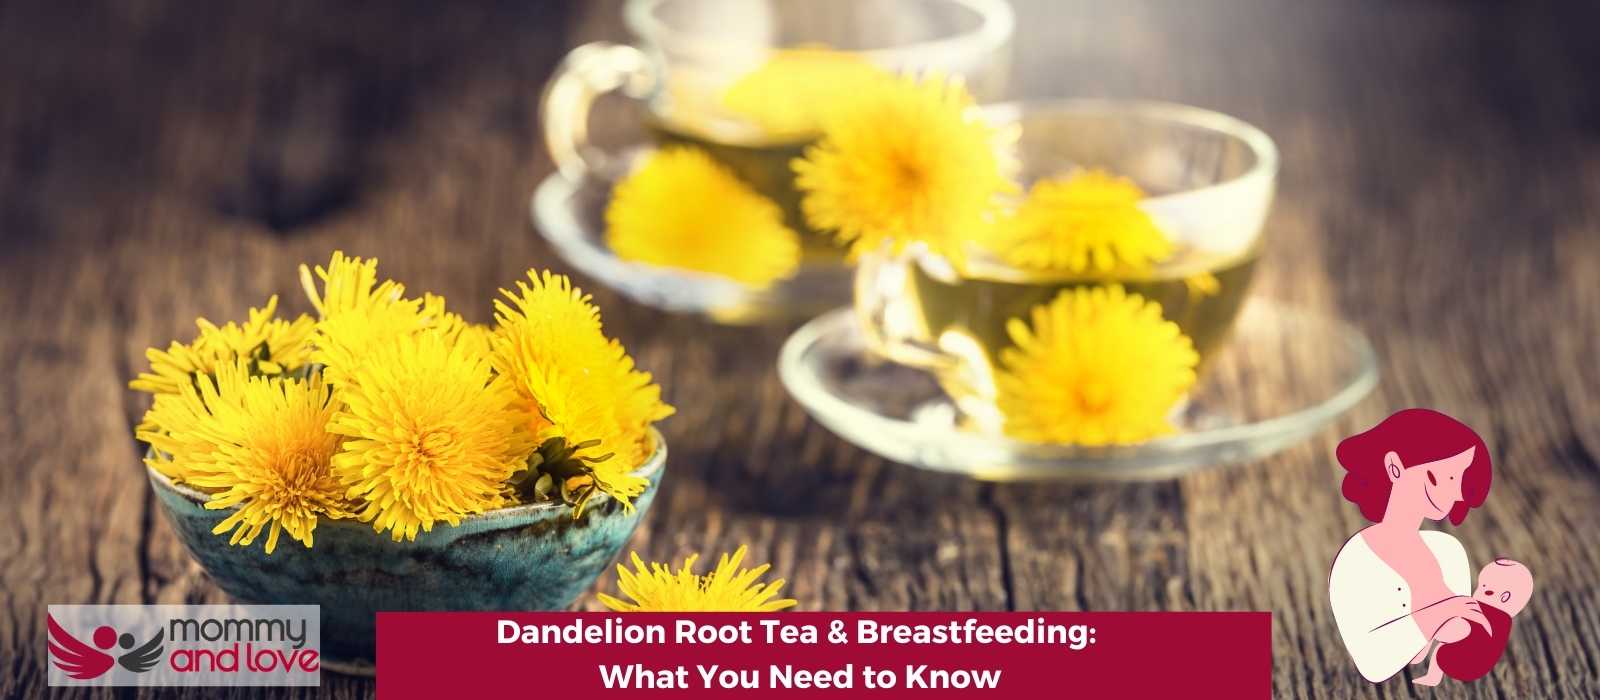 Dandelion Root Tea & Breastfeeding What You Need to Know